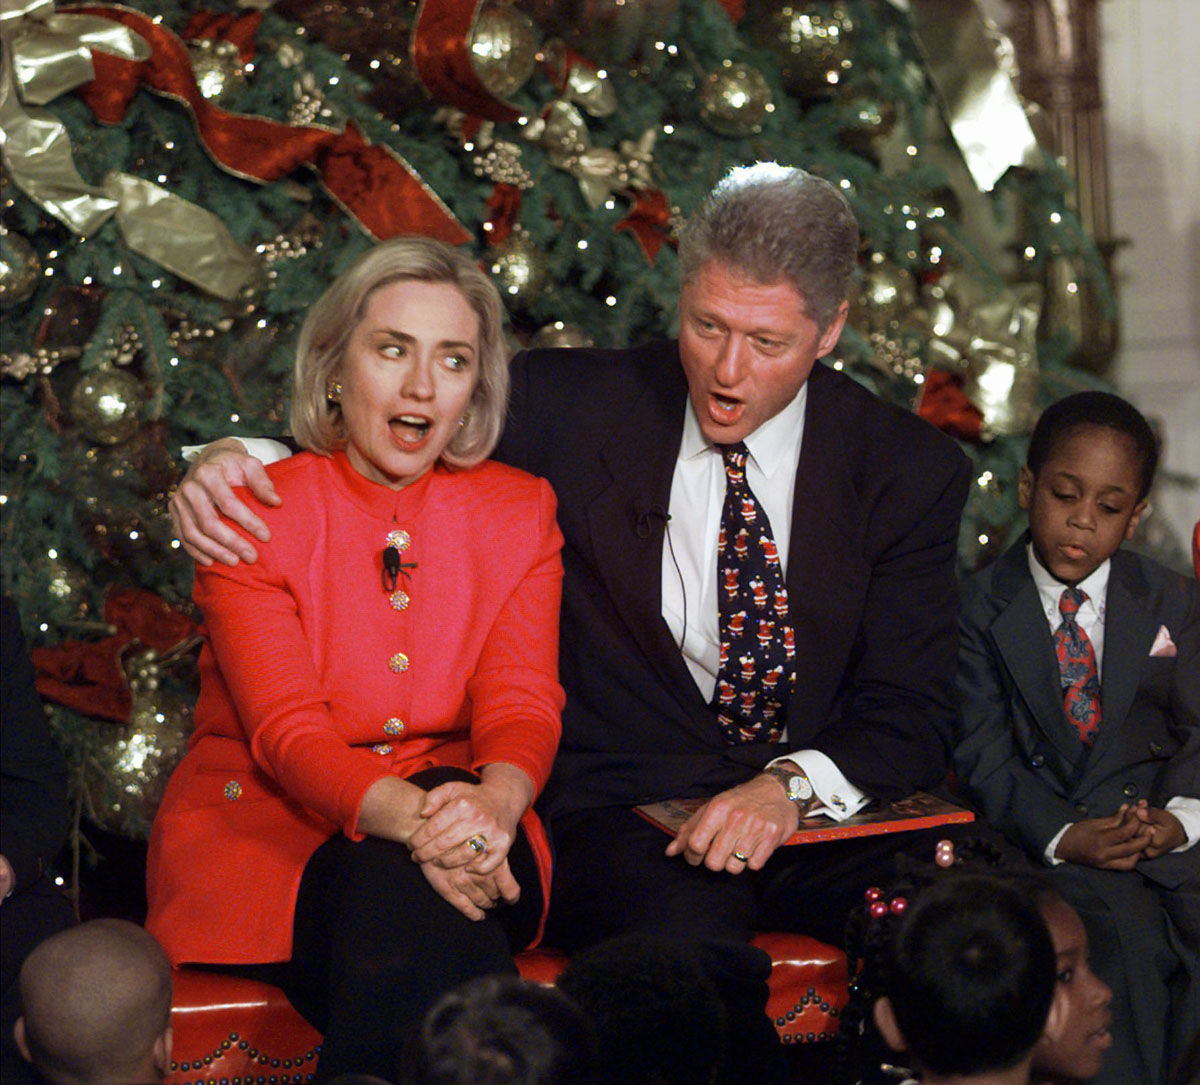 President and Mrs. Clinton sing Christmas carols in the East Room of the White House, Thursday, Dec. 18, 1997, while entertaining children from Washington. For the fifth year, the president and Mrs. Clinton met a group of children and the president read "'Twas the Night Before Christmas." Jelani Irby, a second-grader from Washington's Brightwood Elementary School sits at right. (AP Photo/Ron Edmonds)